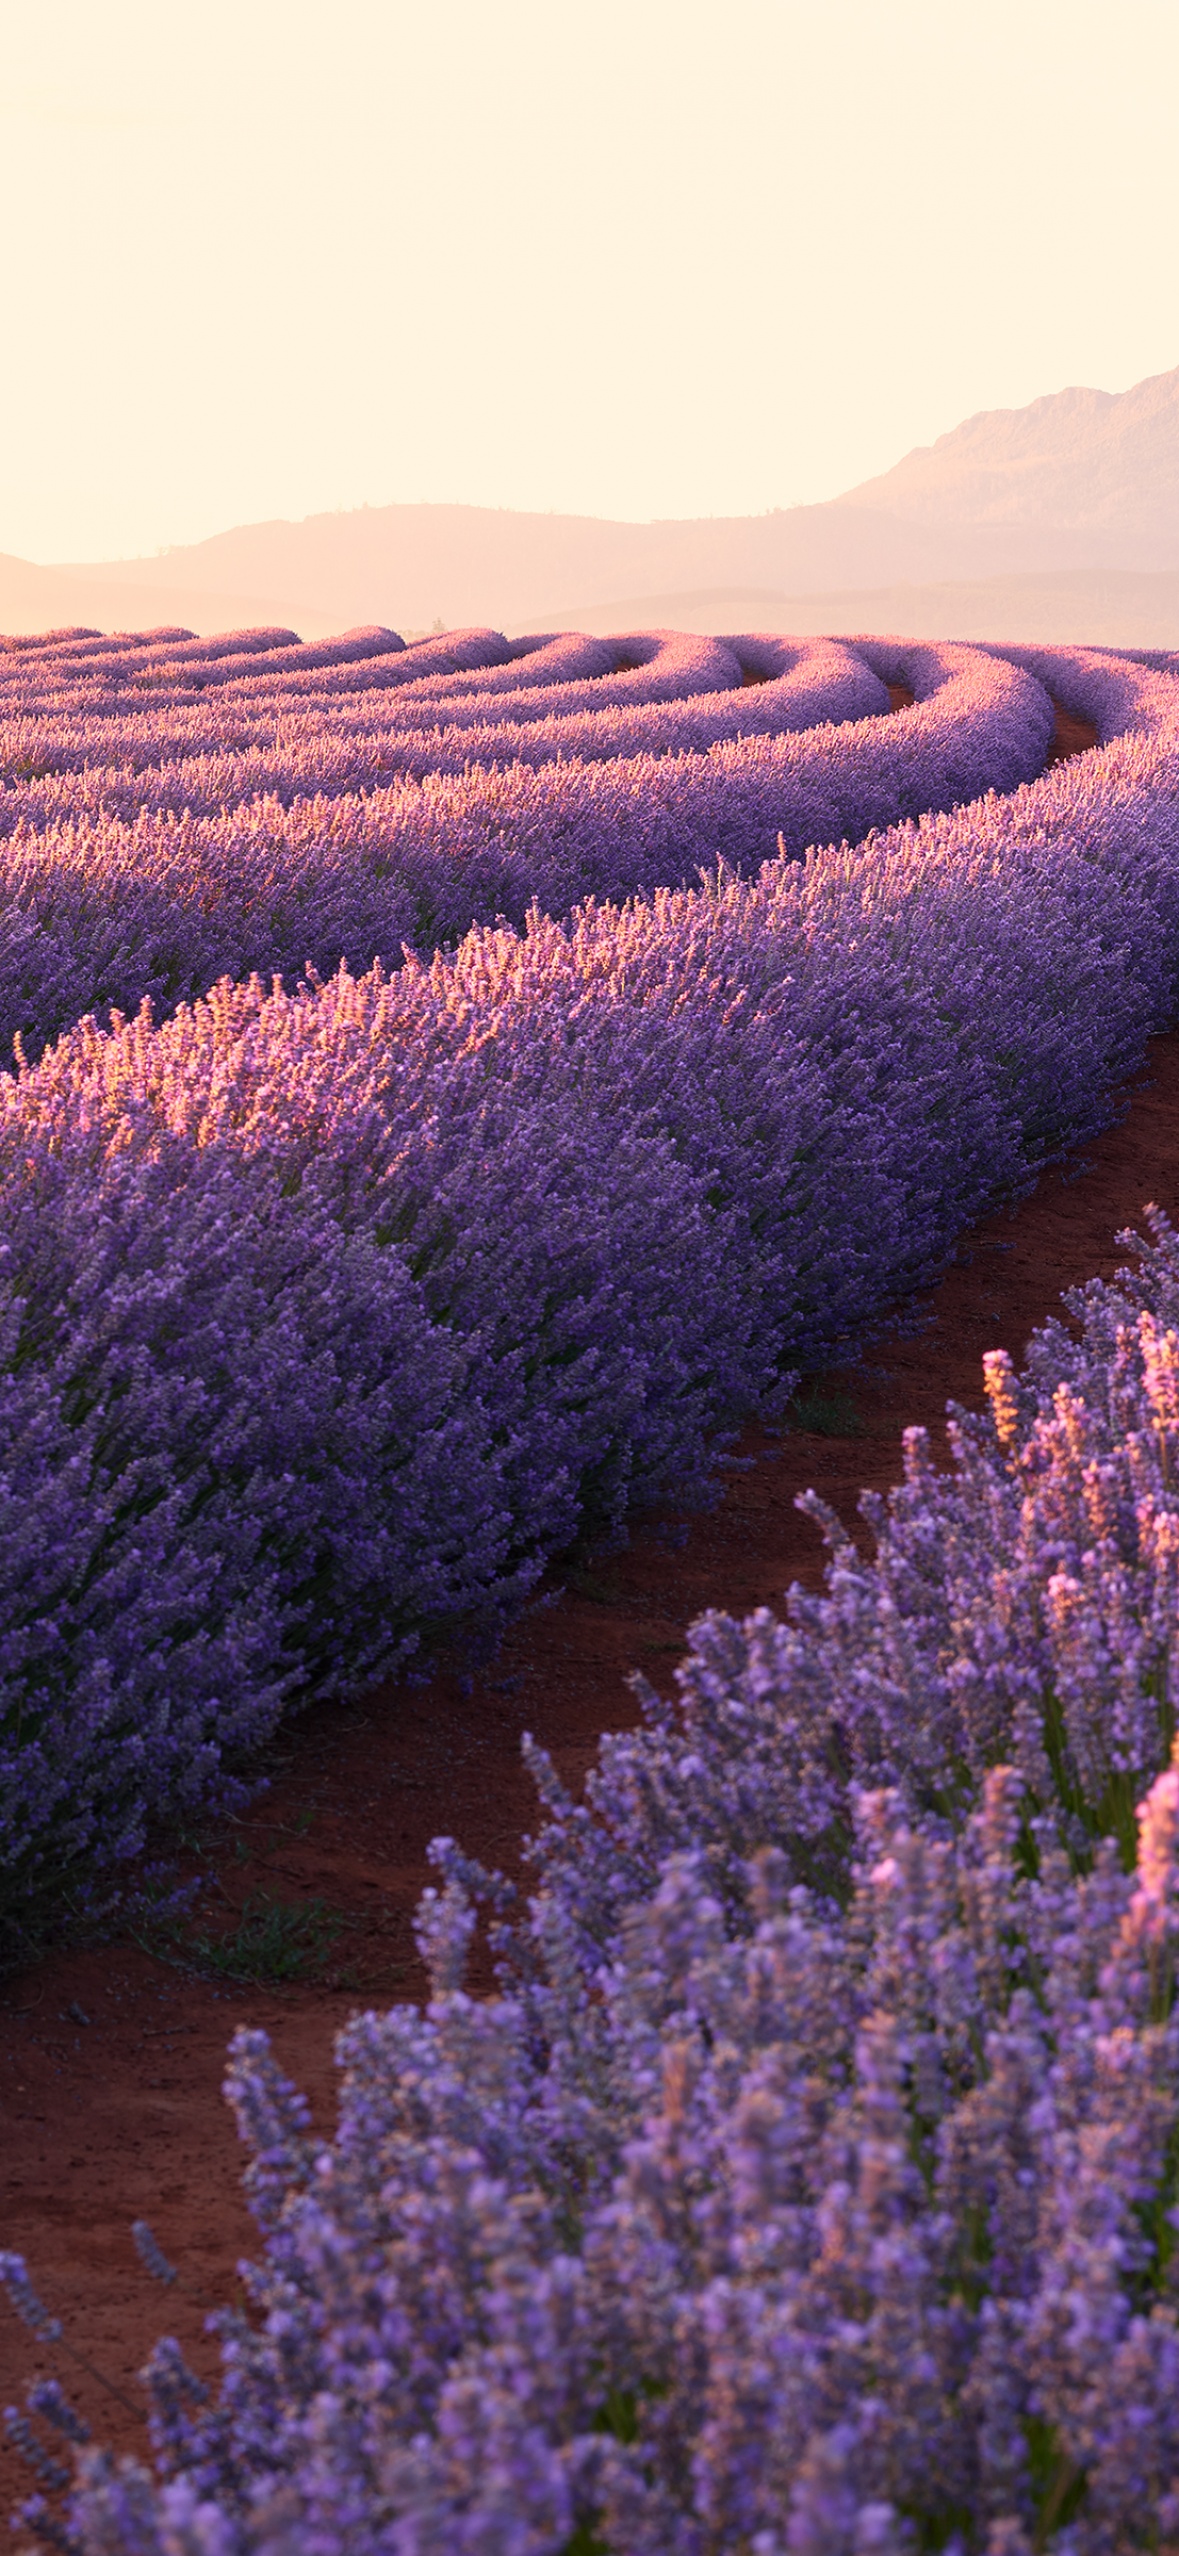 Lavender Flower Background Hd Images 3 HD Wallpapers  aduphoto